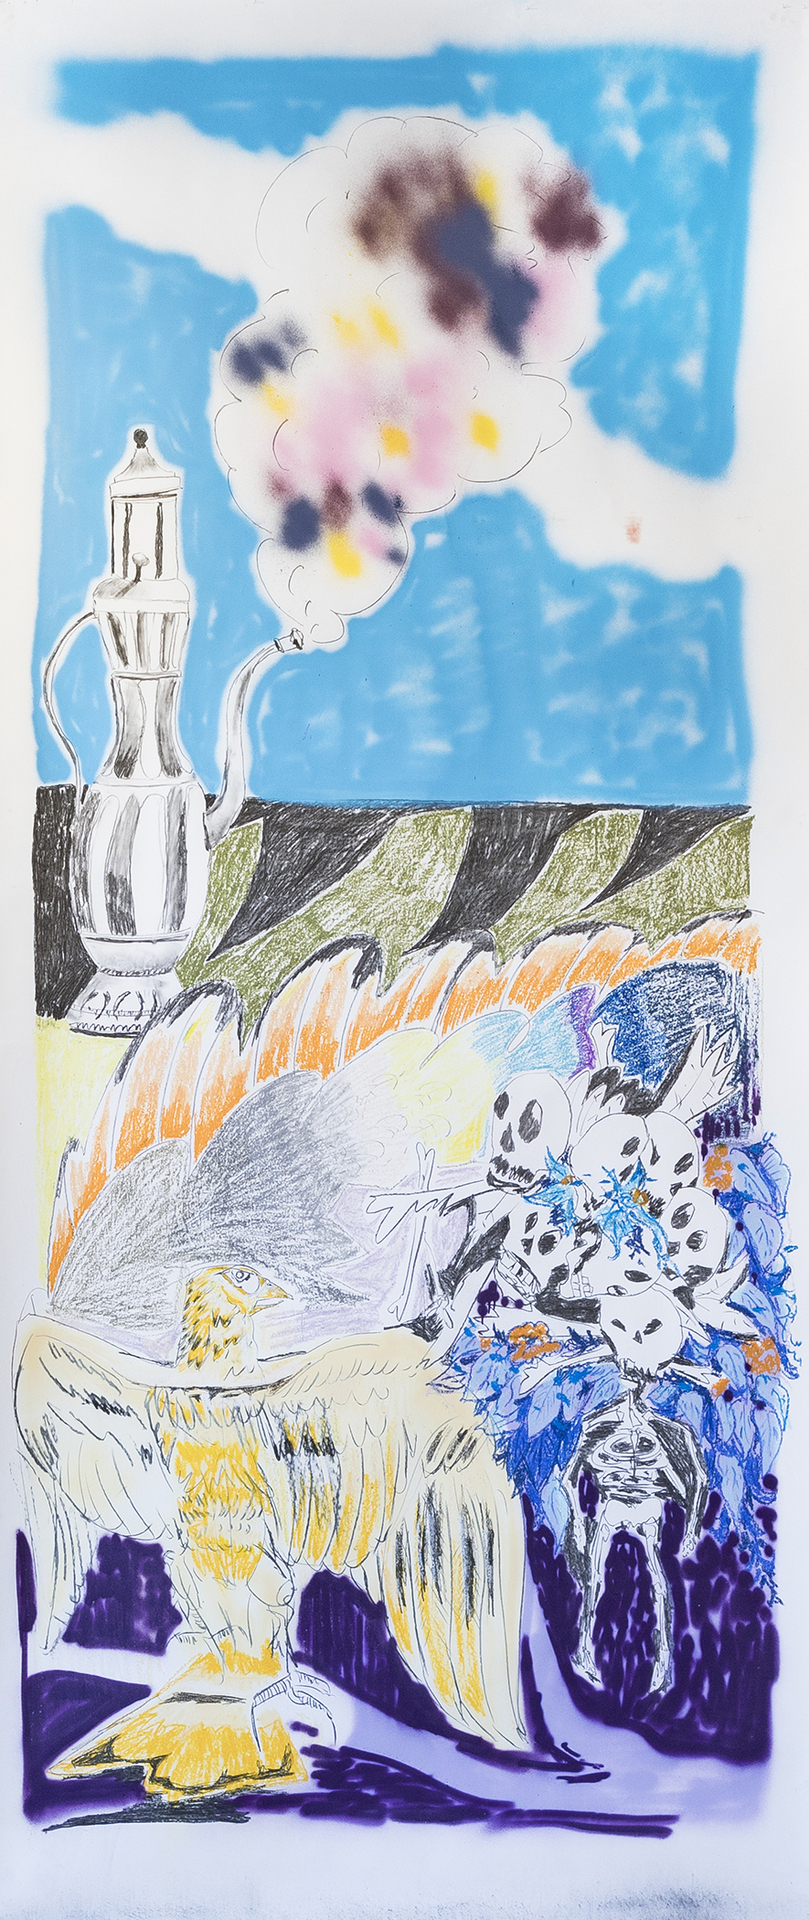 Oil lamp and sculls, 356x150cm, 2020, oil chalk on paper